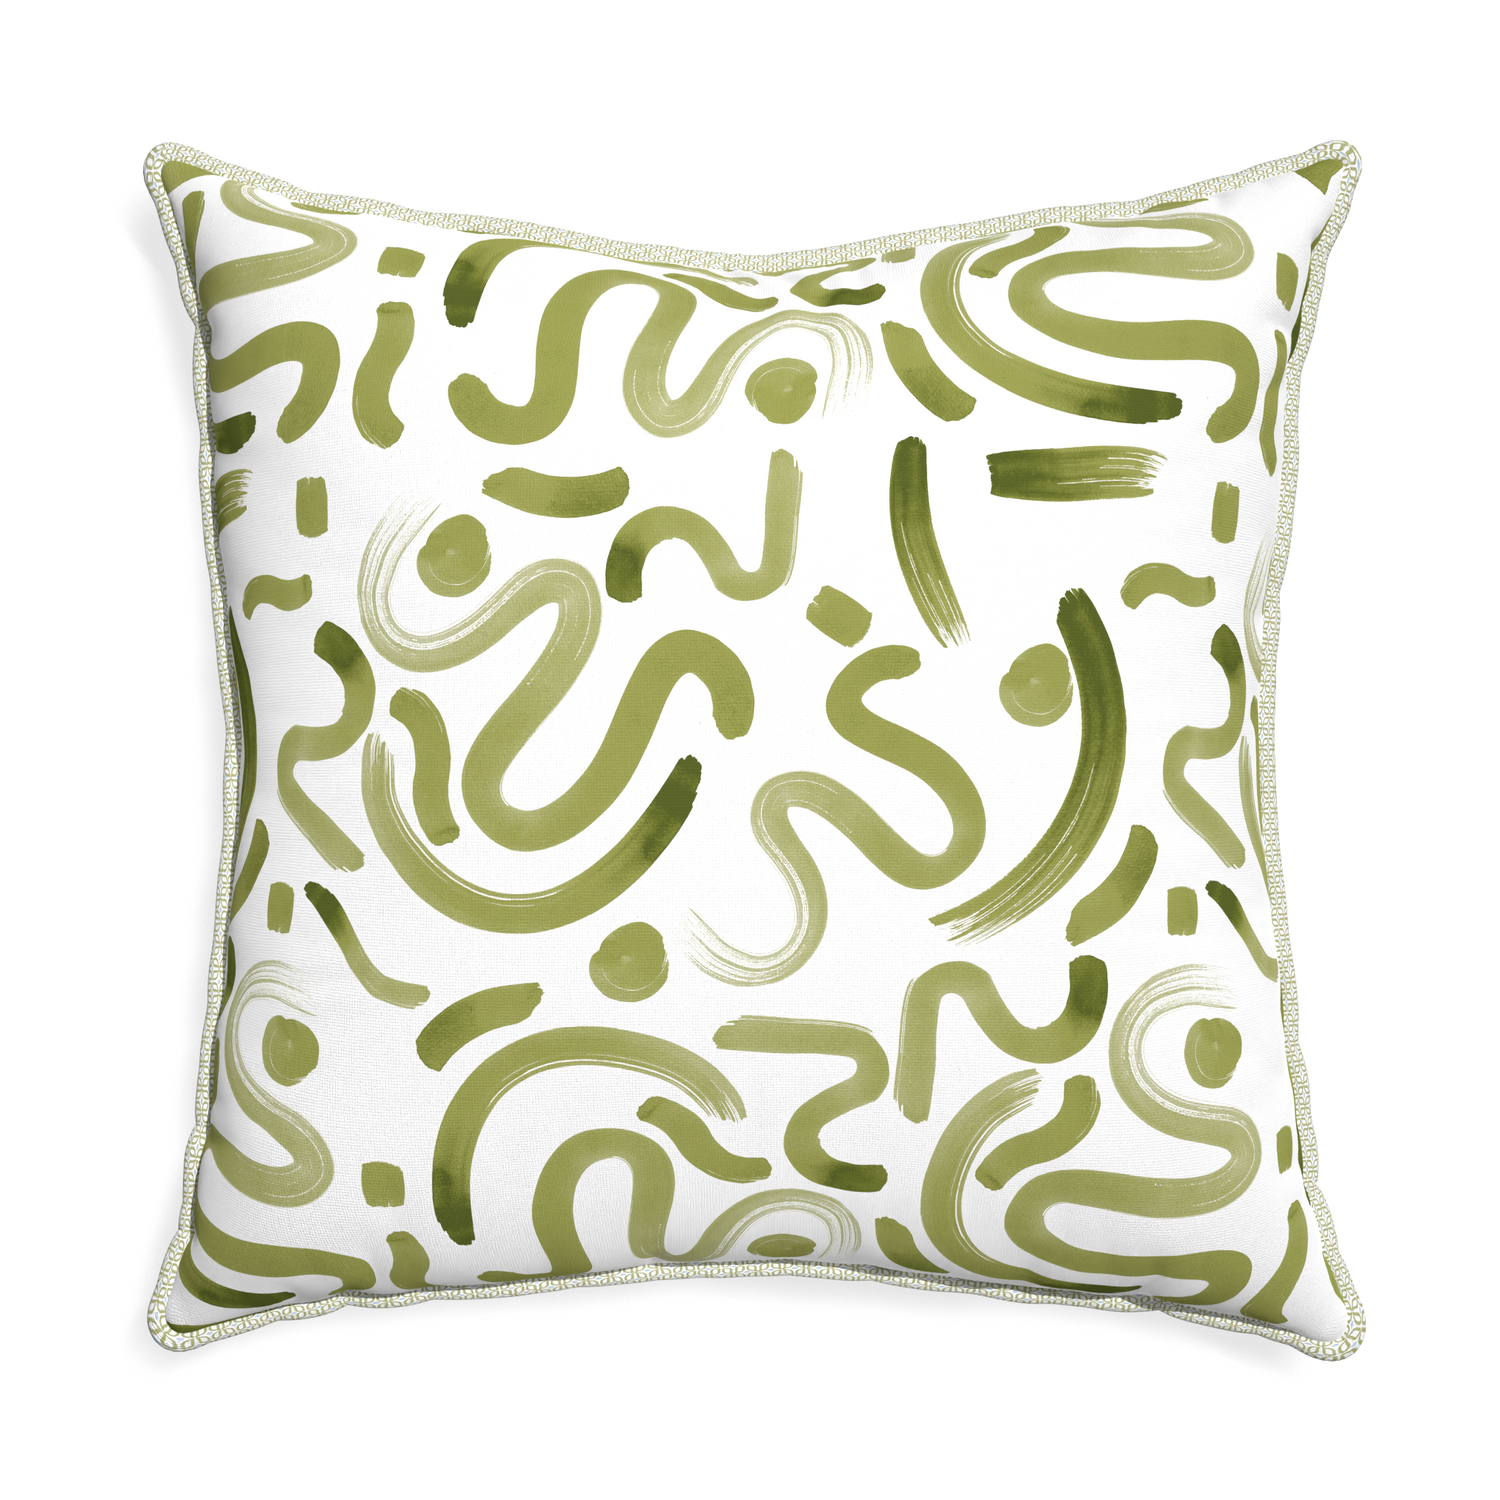 Euro-sham hockney moss custom pillow with l piping on white background